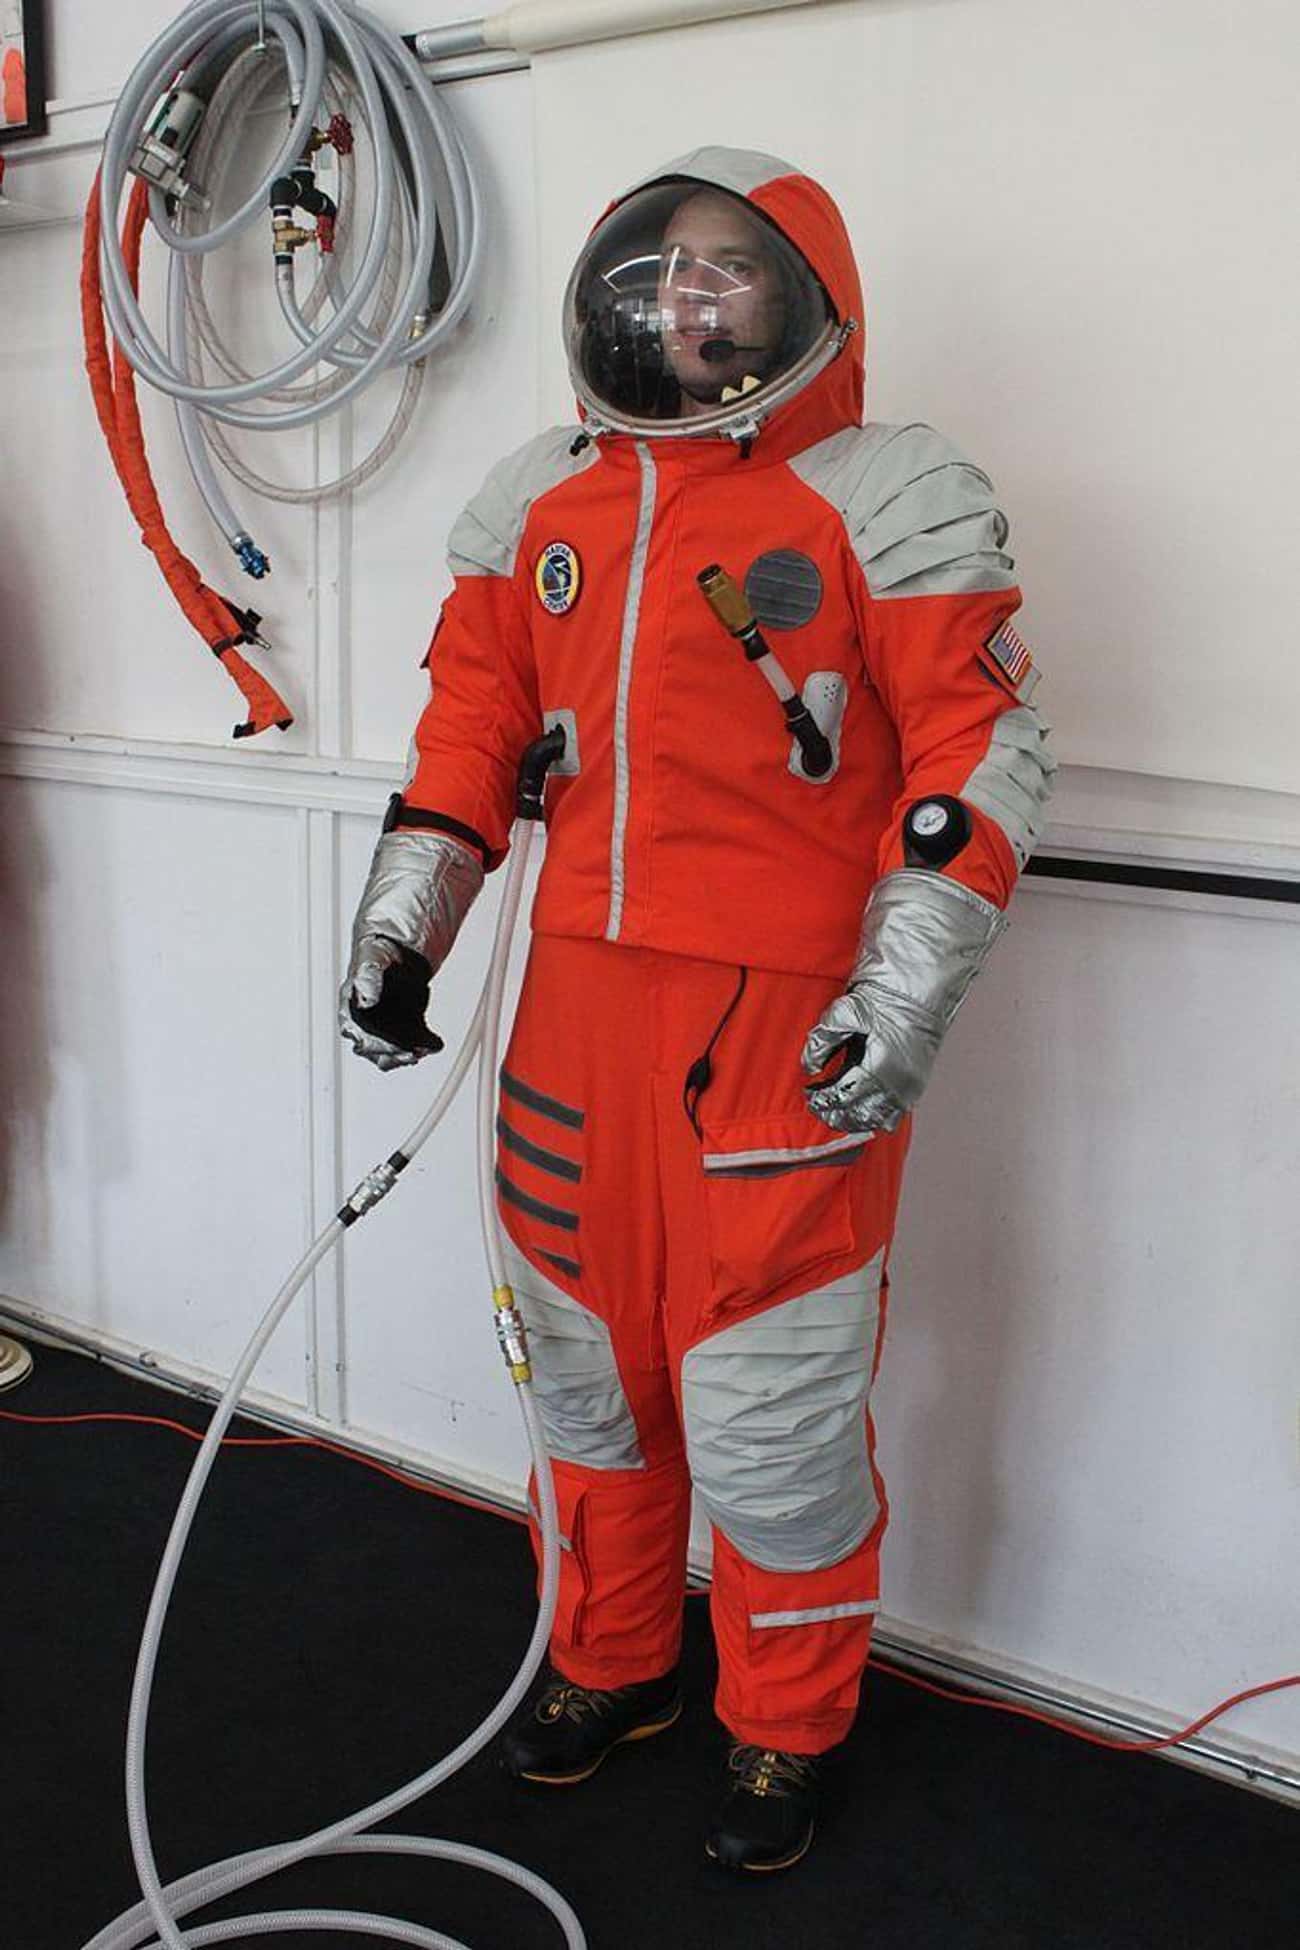 2011: Final Frontier Design IVA Space Suit, United States